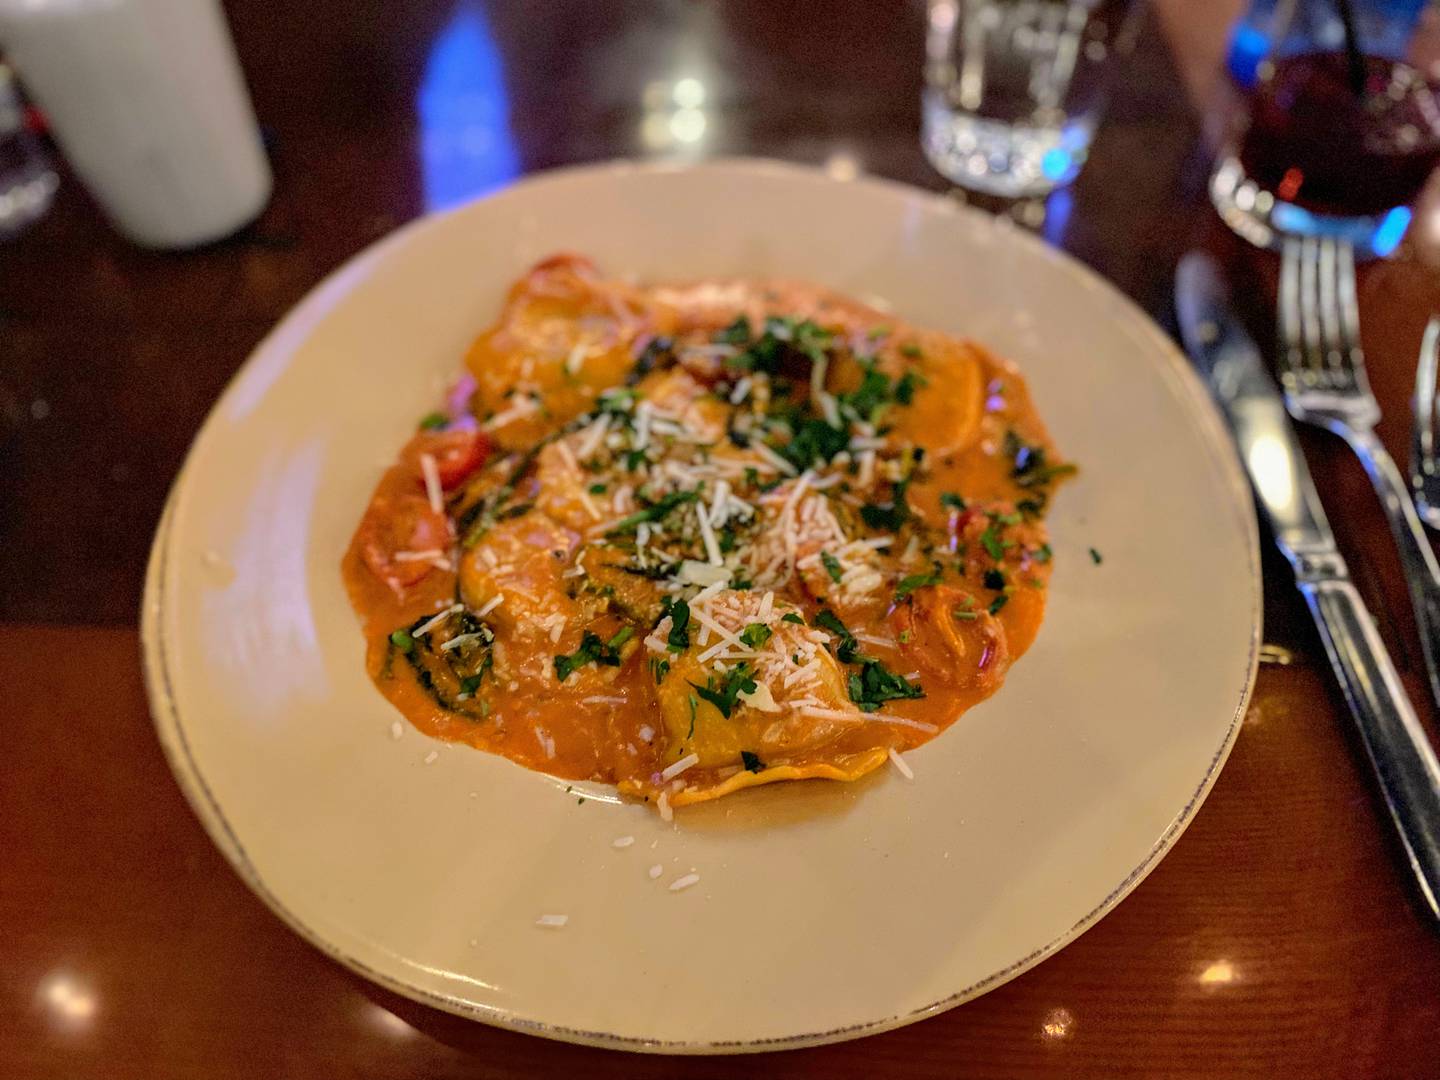 My fellow diner had the lobster ravioli ($21.90) at 750° Cucina Rustica in Cary.